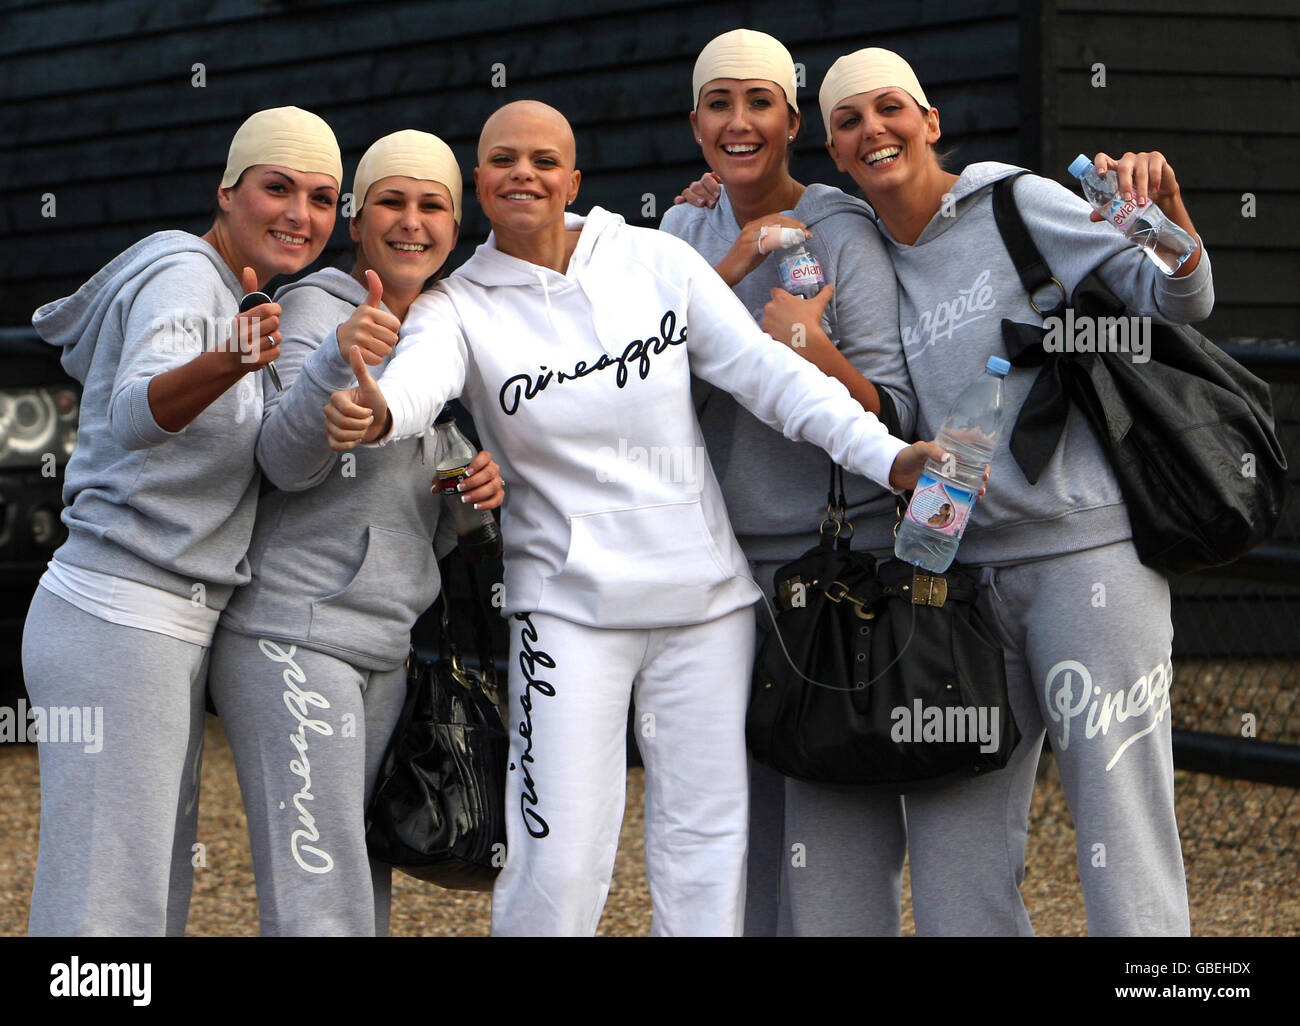 Reality television star Jade Goody poses with friends wearing joke skull caps outside her Essex home on the day before her wedding to fiance Jack Tweed. Stock Photo